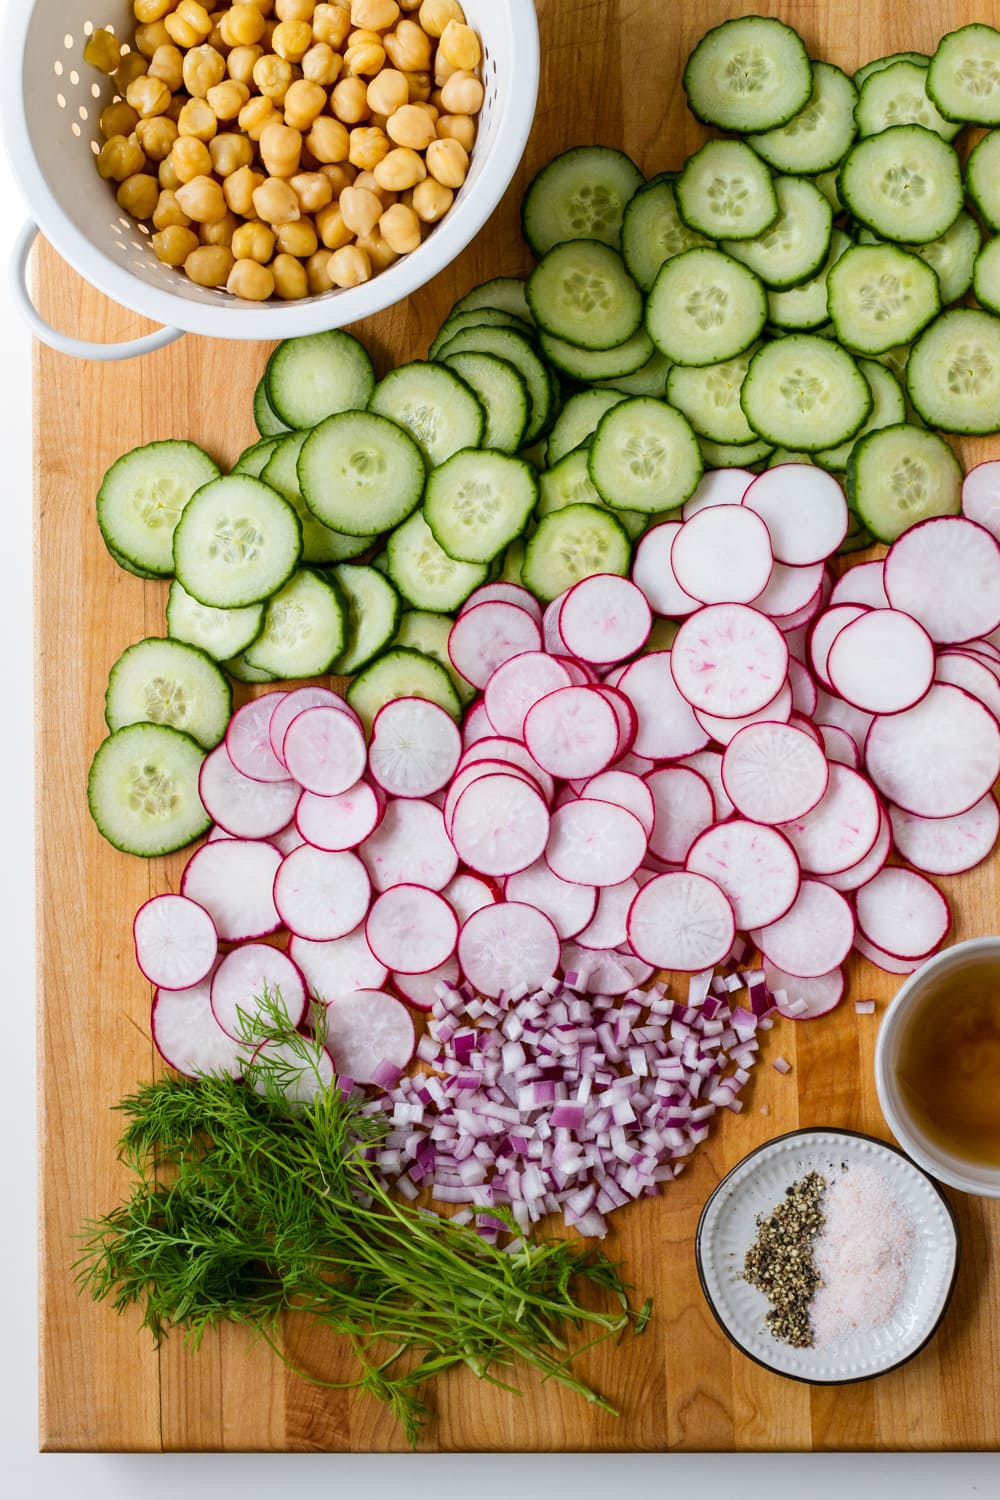 top down view of a wooden cutting board with sliced radishes, cucumbers, diced red onion, whole chickpeas in a small white colander, dill, apple cider vinegar and small dish with salt and pepper